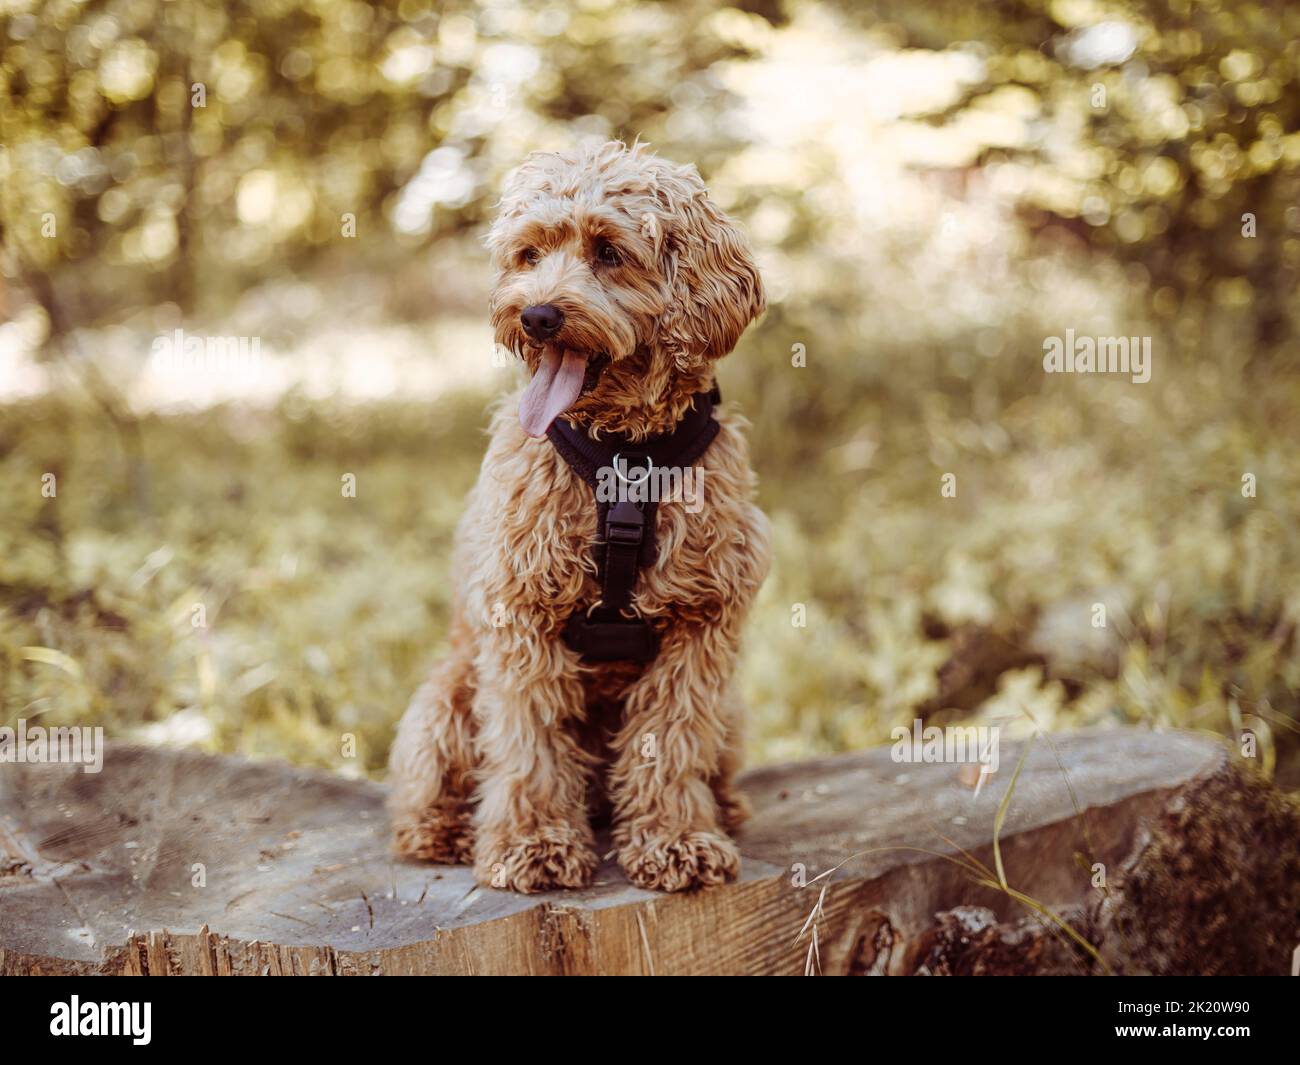 Cavapoo dog wearing black harness sitting steady with tongue out, looking to right. Female dog with curly fur sitting on the stomp in the woods. Stock Photo